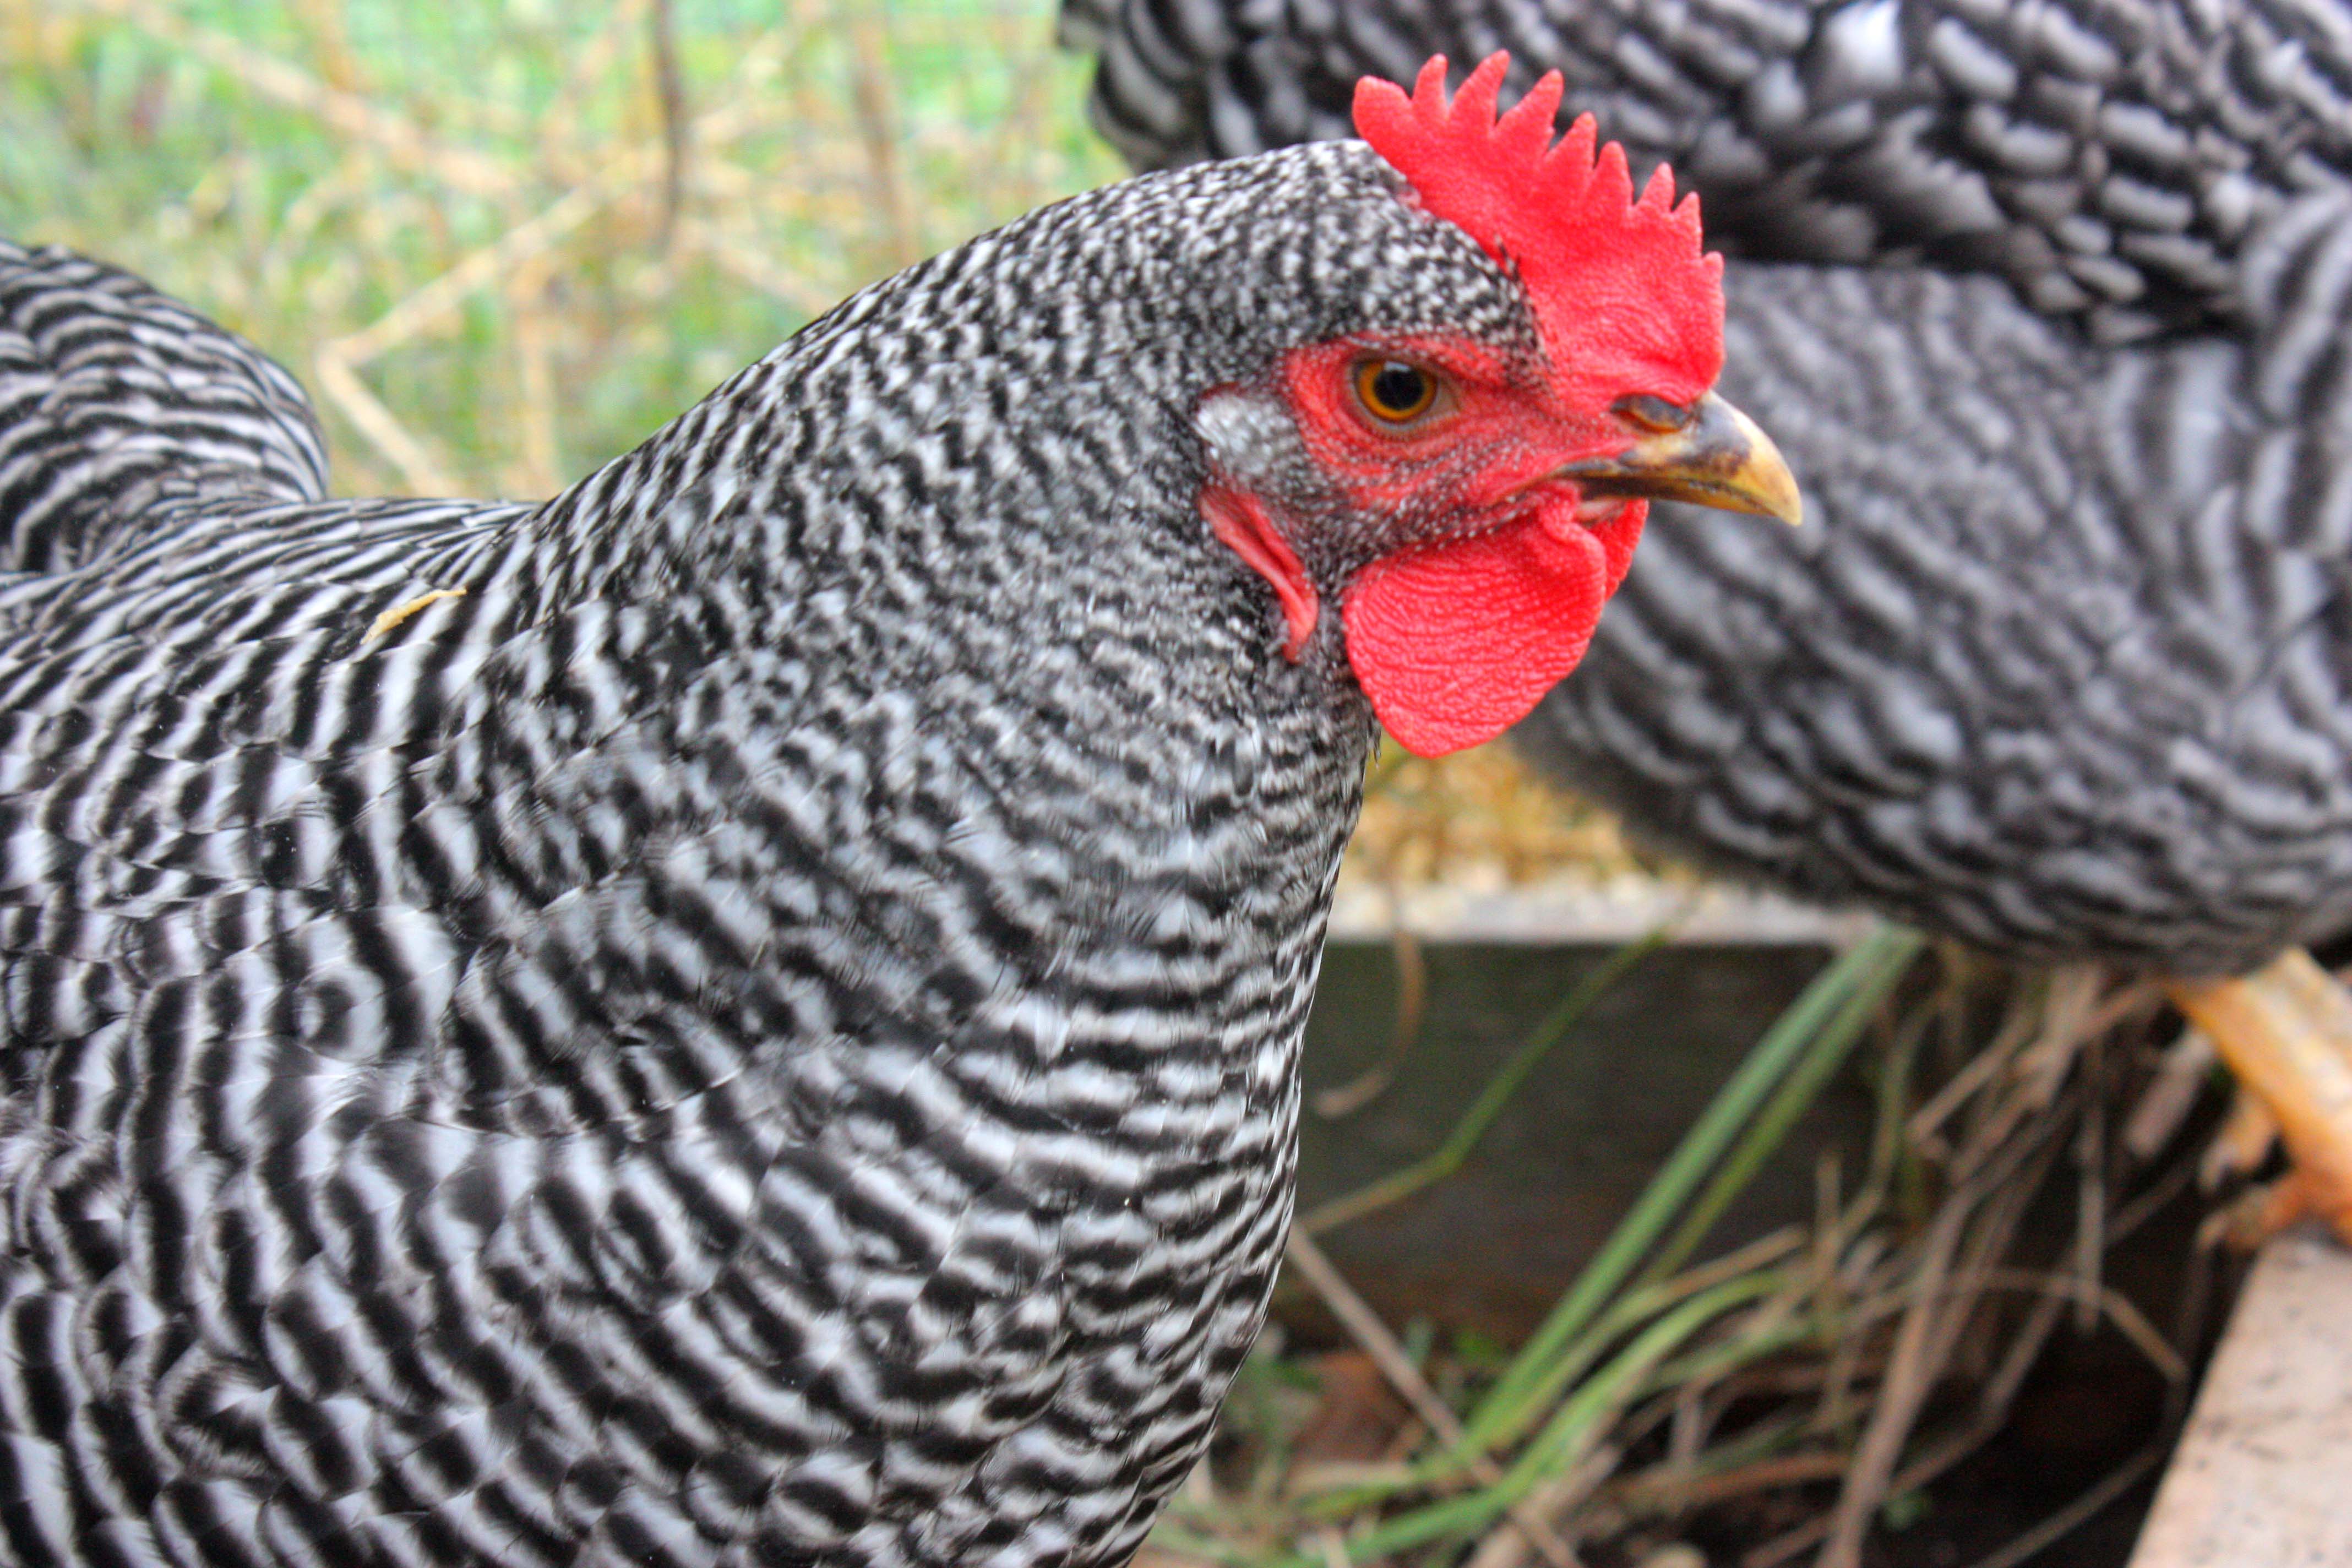 9 Fascinating Reasons People Like Plymouth Rock Chicken (Updated Feb. 2022)